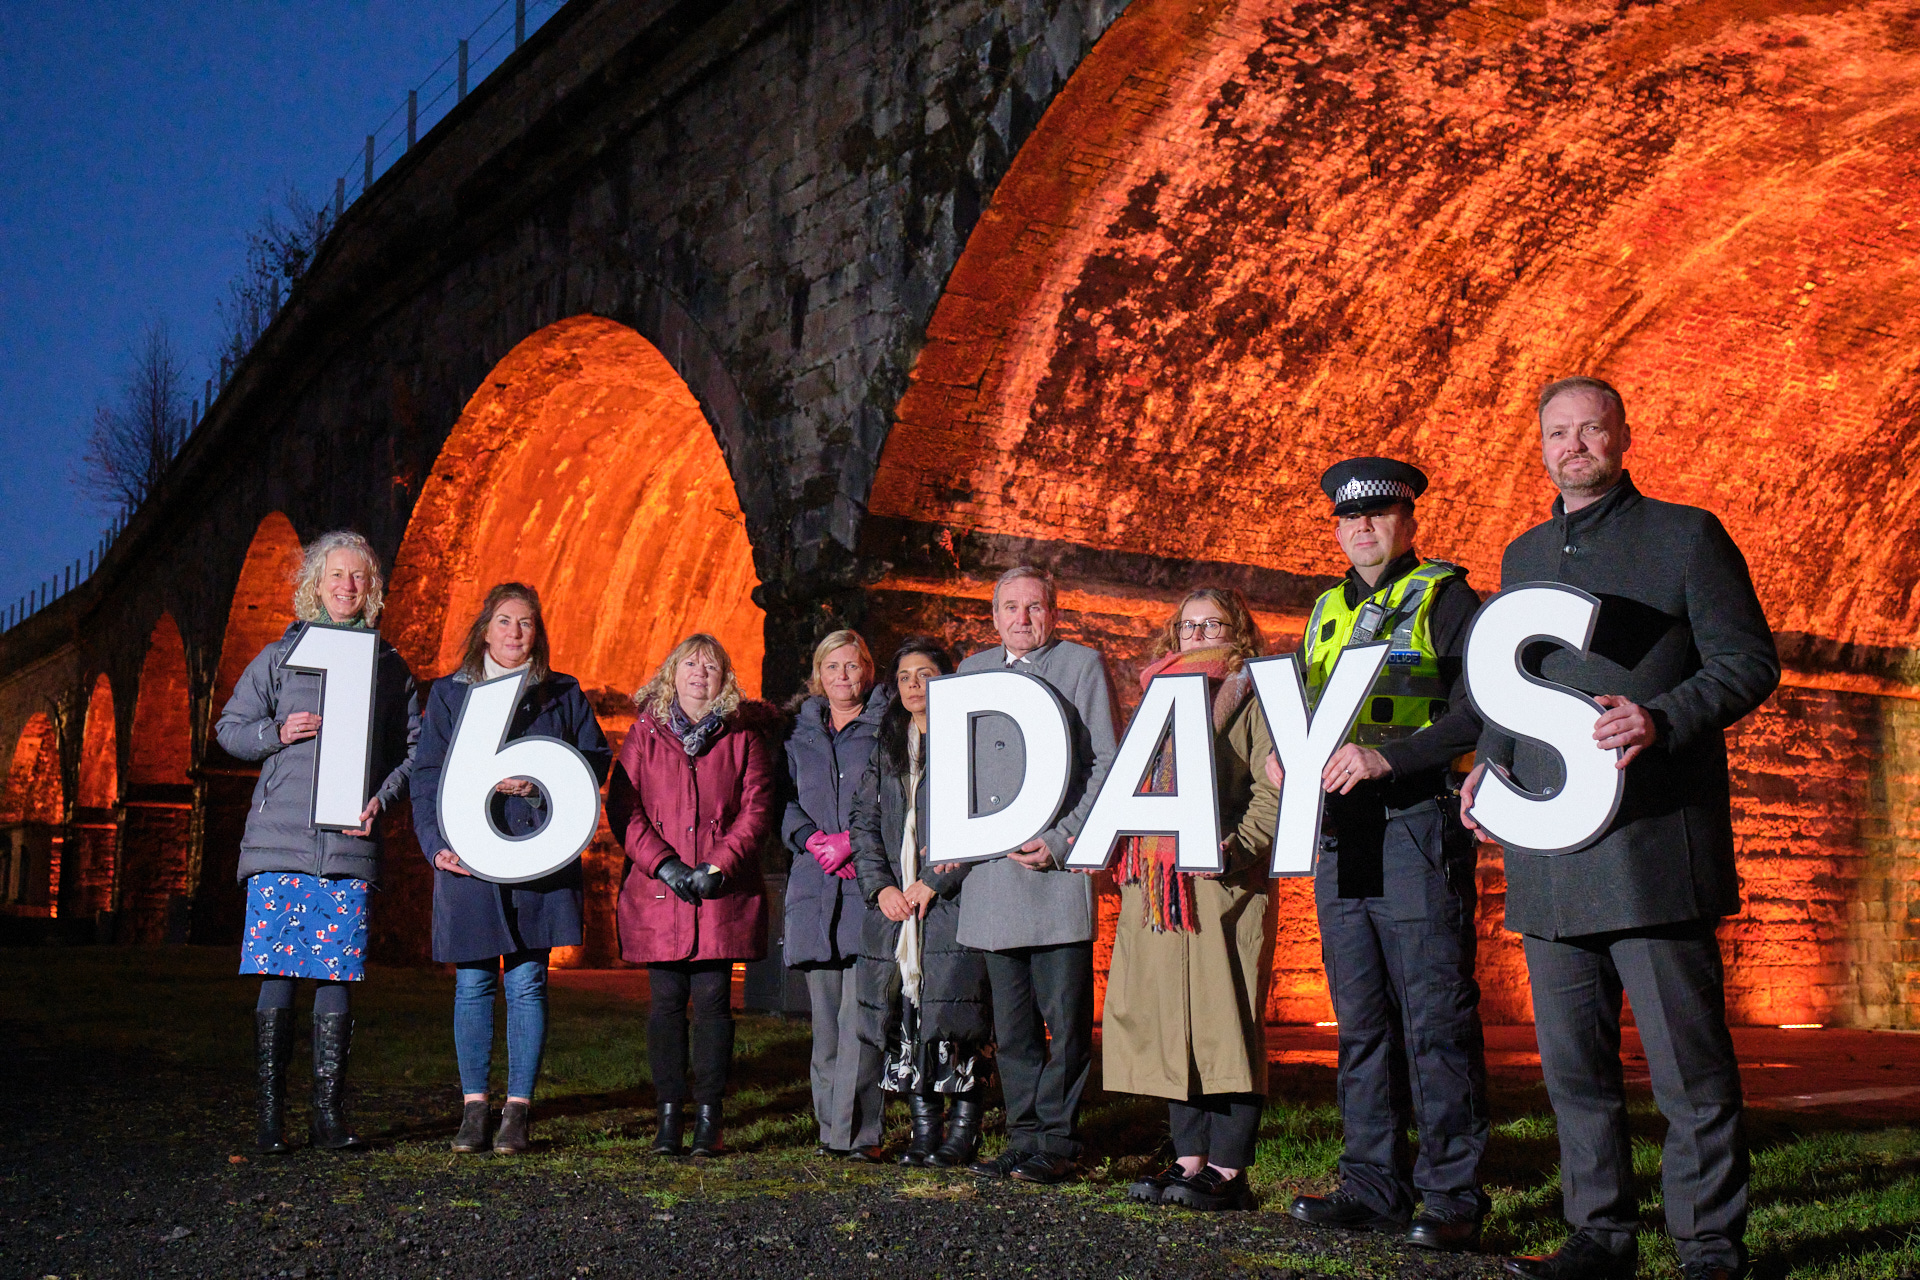 Staff from EAHSCP, EAC Equalities and Ayrshire Police Division at the launch of the 16 Days of Action campaign